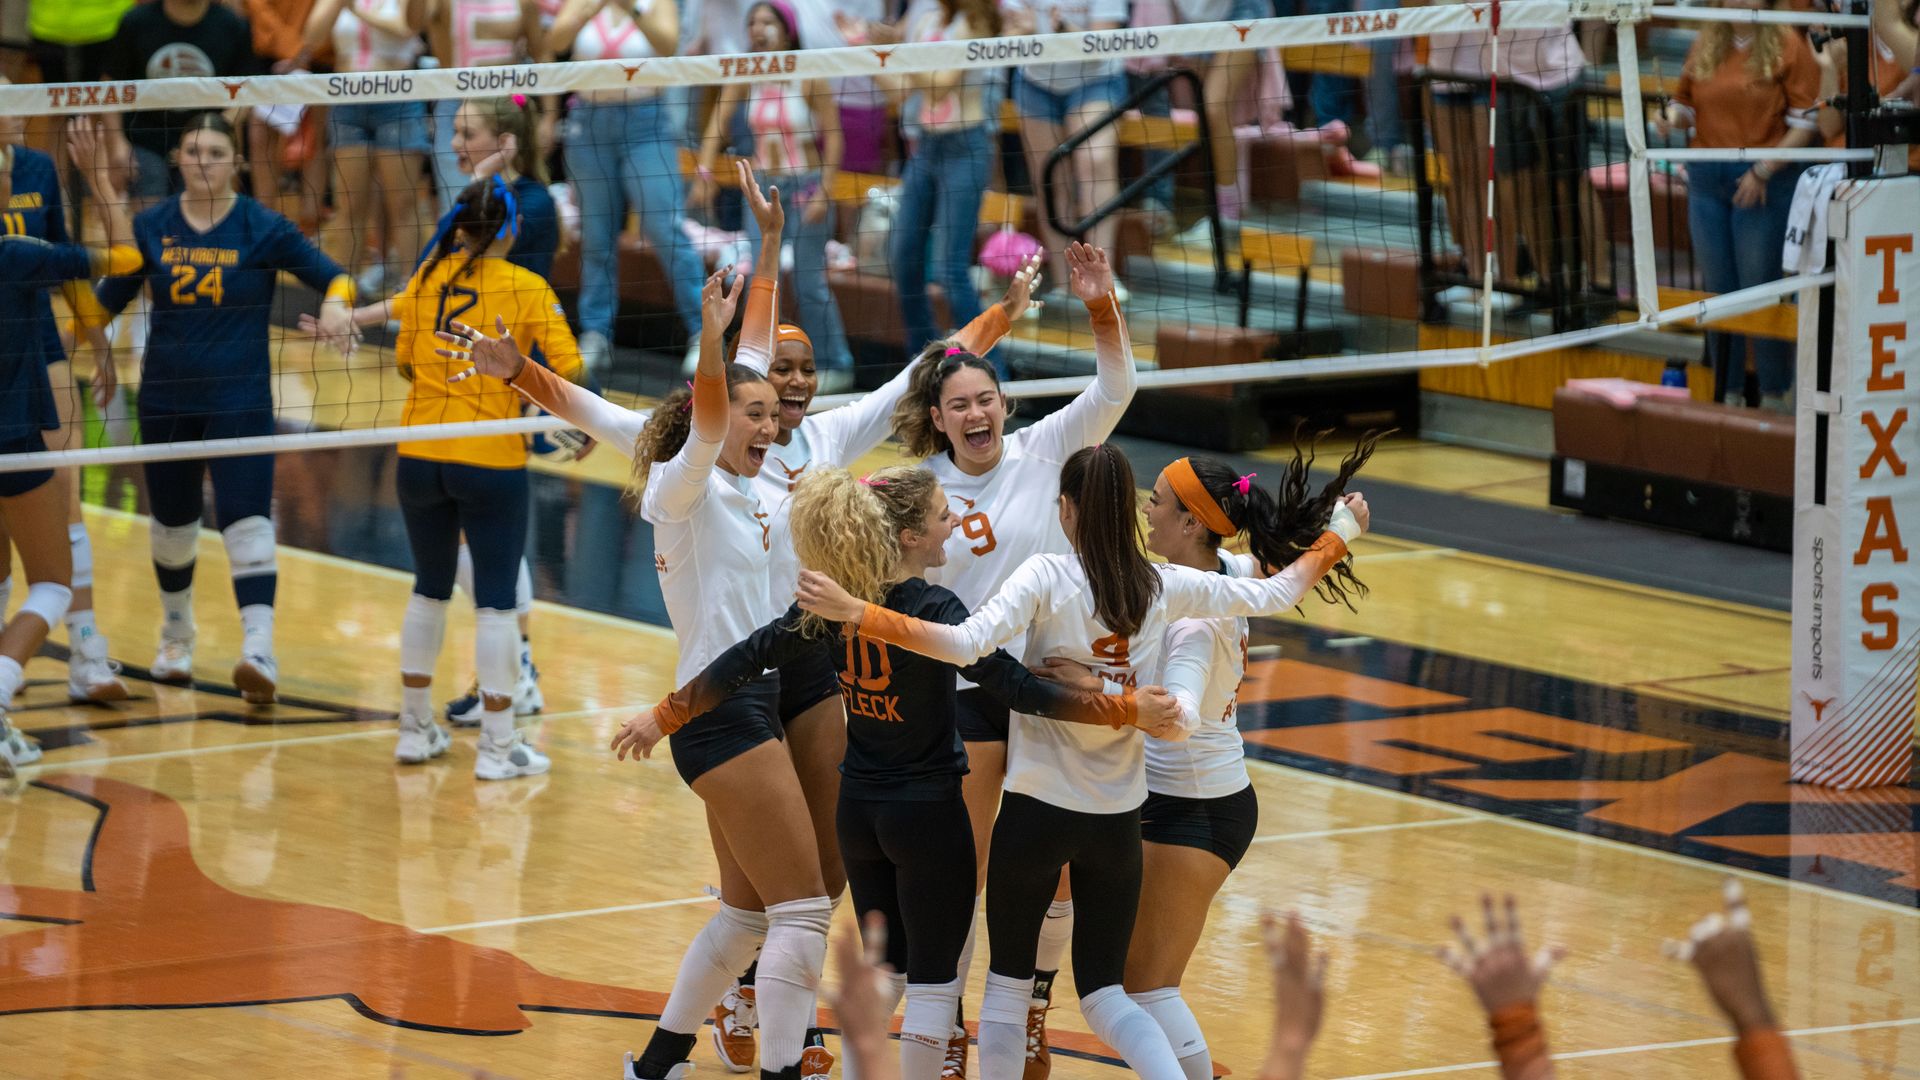 The University of Texas volleyball team huddles in triumph during a match at Gregory Gym. 